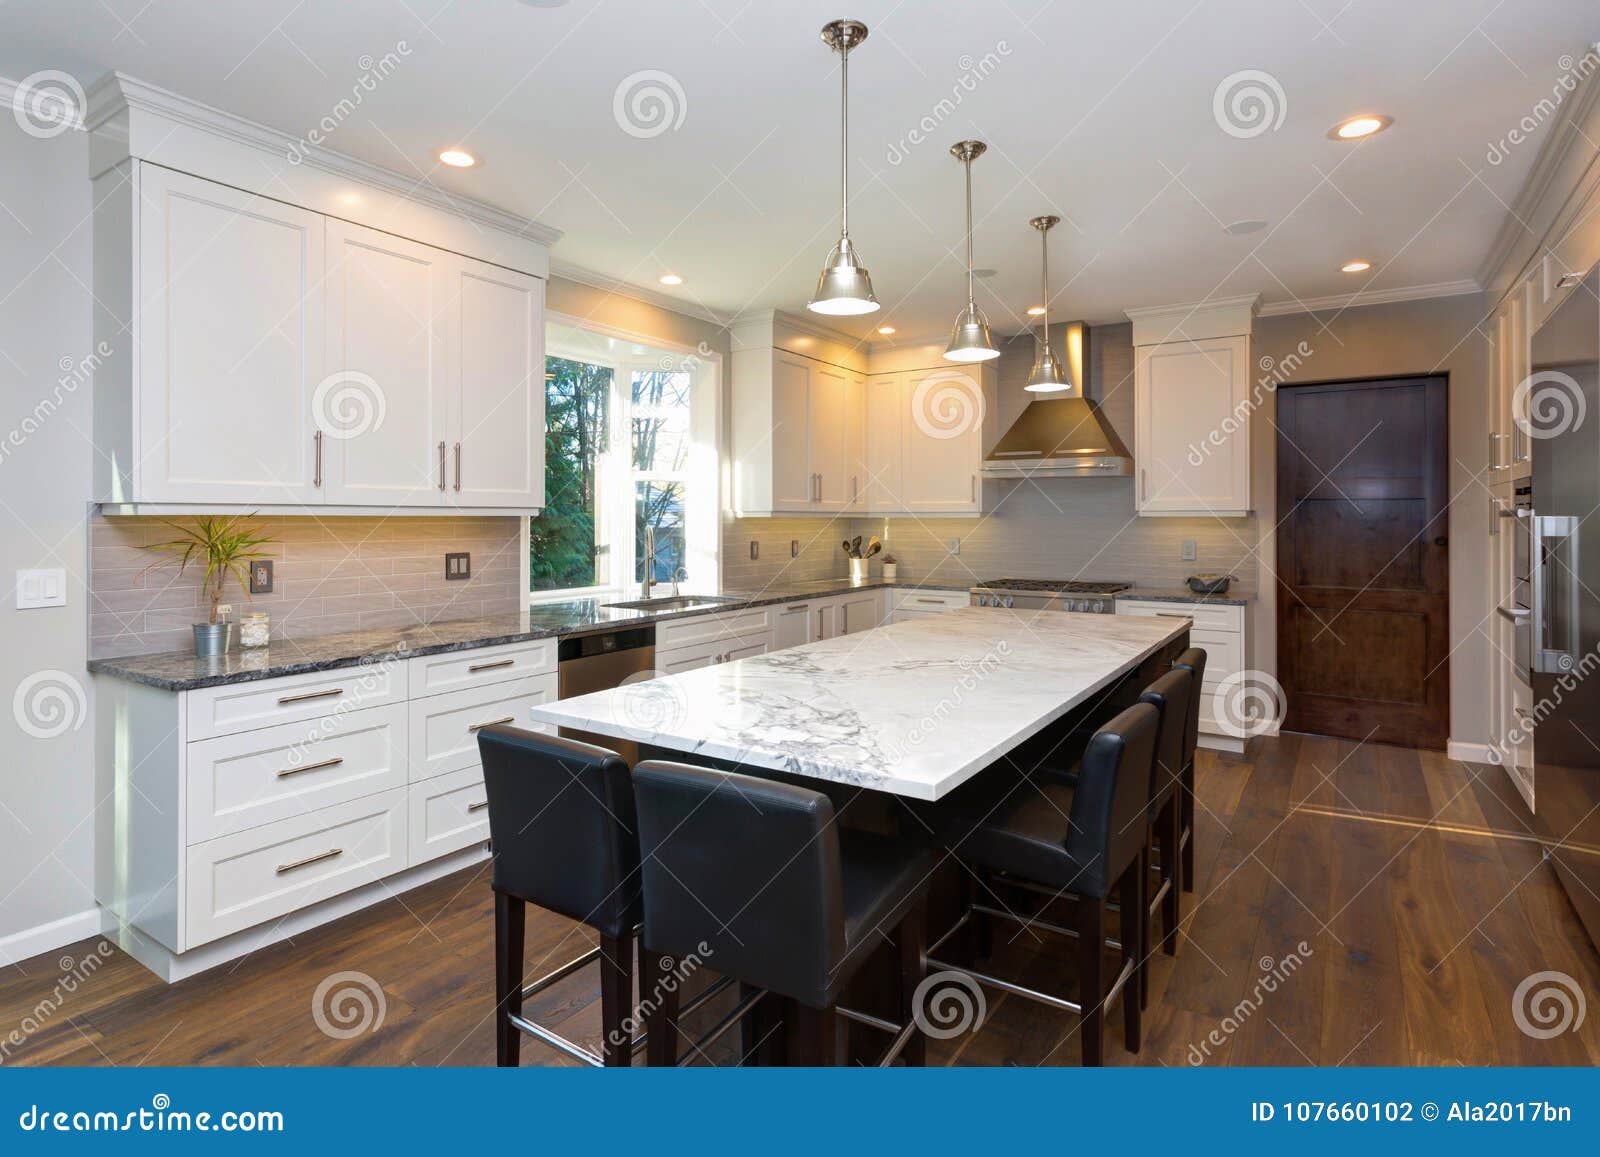 Beautiful Black And White Kitchen Design Stock Photo Image Of Ceiling